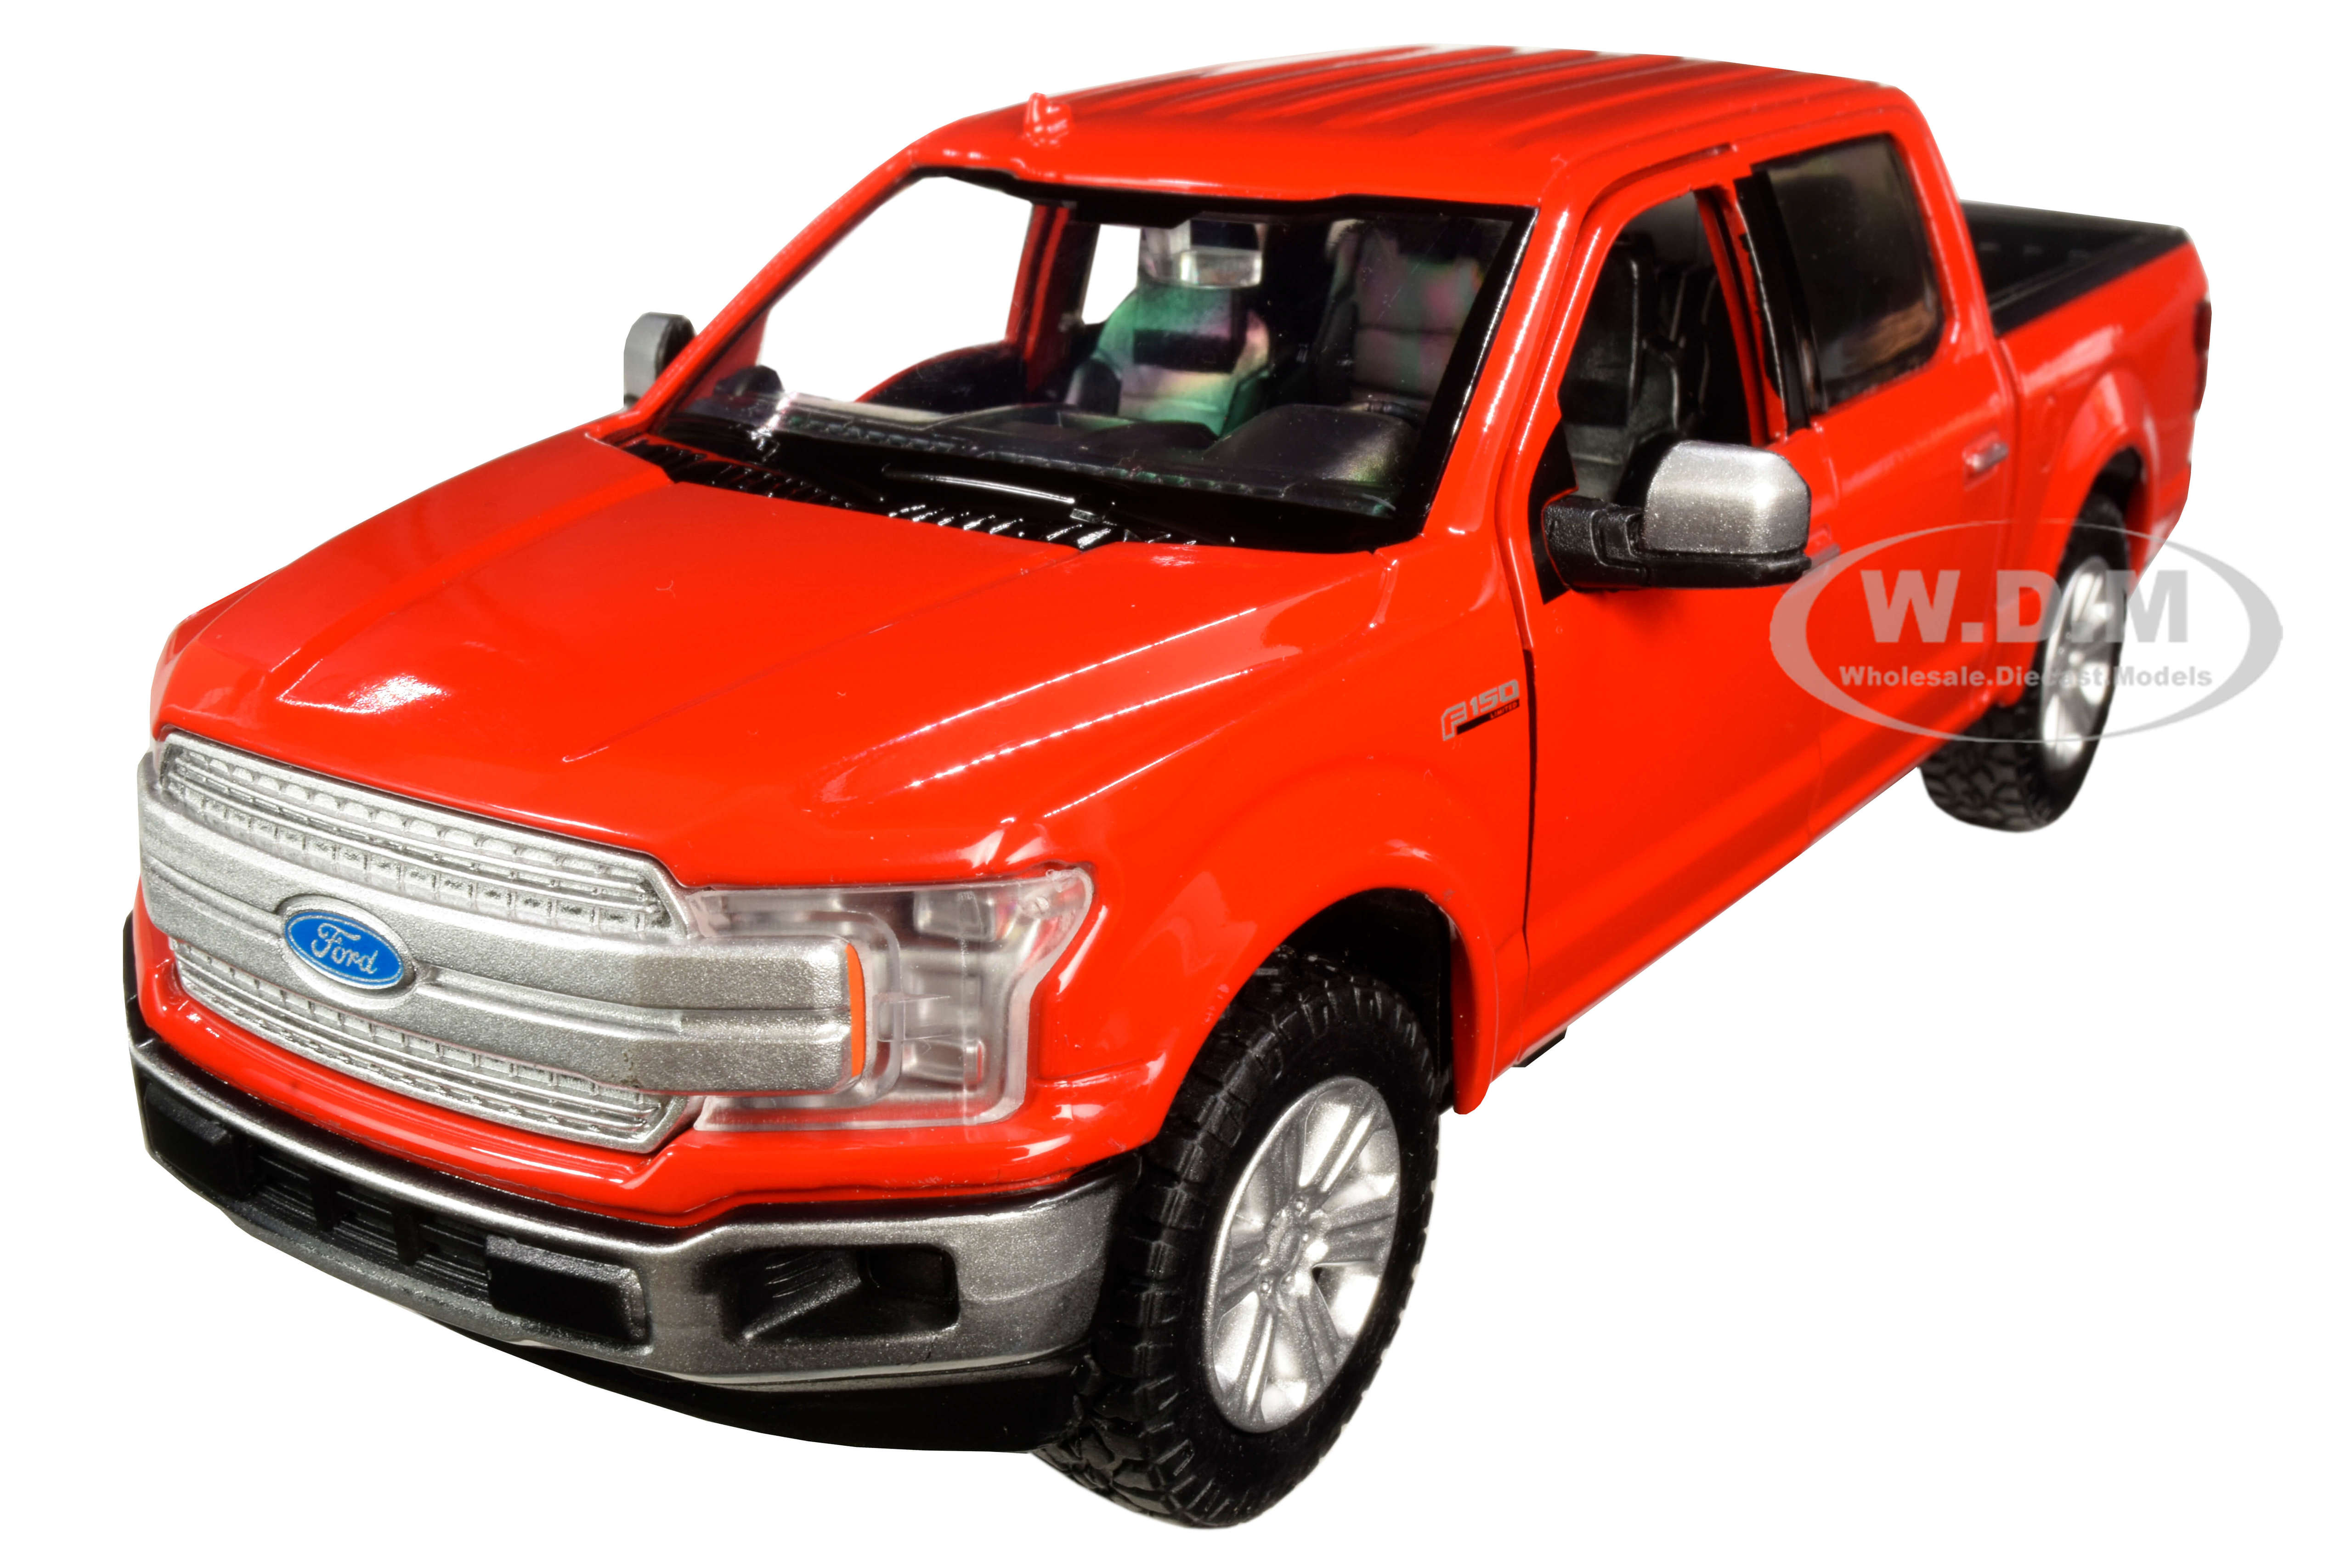 2019 Ford F-150 Lariat Crew Cab Pickup Truck Red 1/24-1/27 Diecast Model Car by Motormax